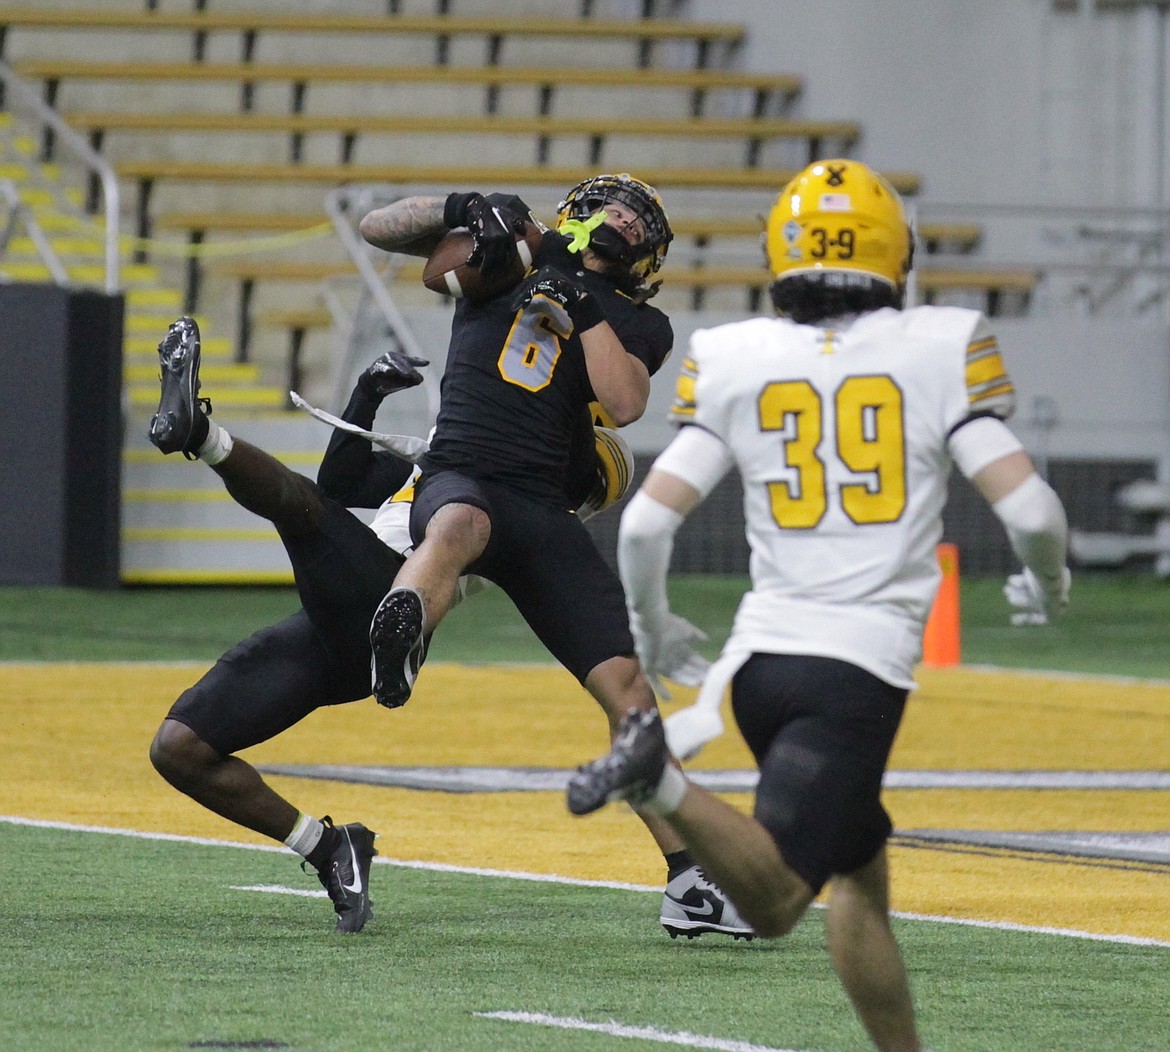 MARK NELKE/Press
Jordan Dwyer (6) of the Black team makes a leaping catch for a touchdown in the fourth quarter as Abraham Williams, rear, defends, and Jacob Skobis (39) looks on during Idaho's spring football game Friday night at the Kibbie Dome in Moscow.